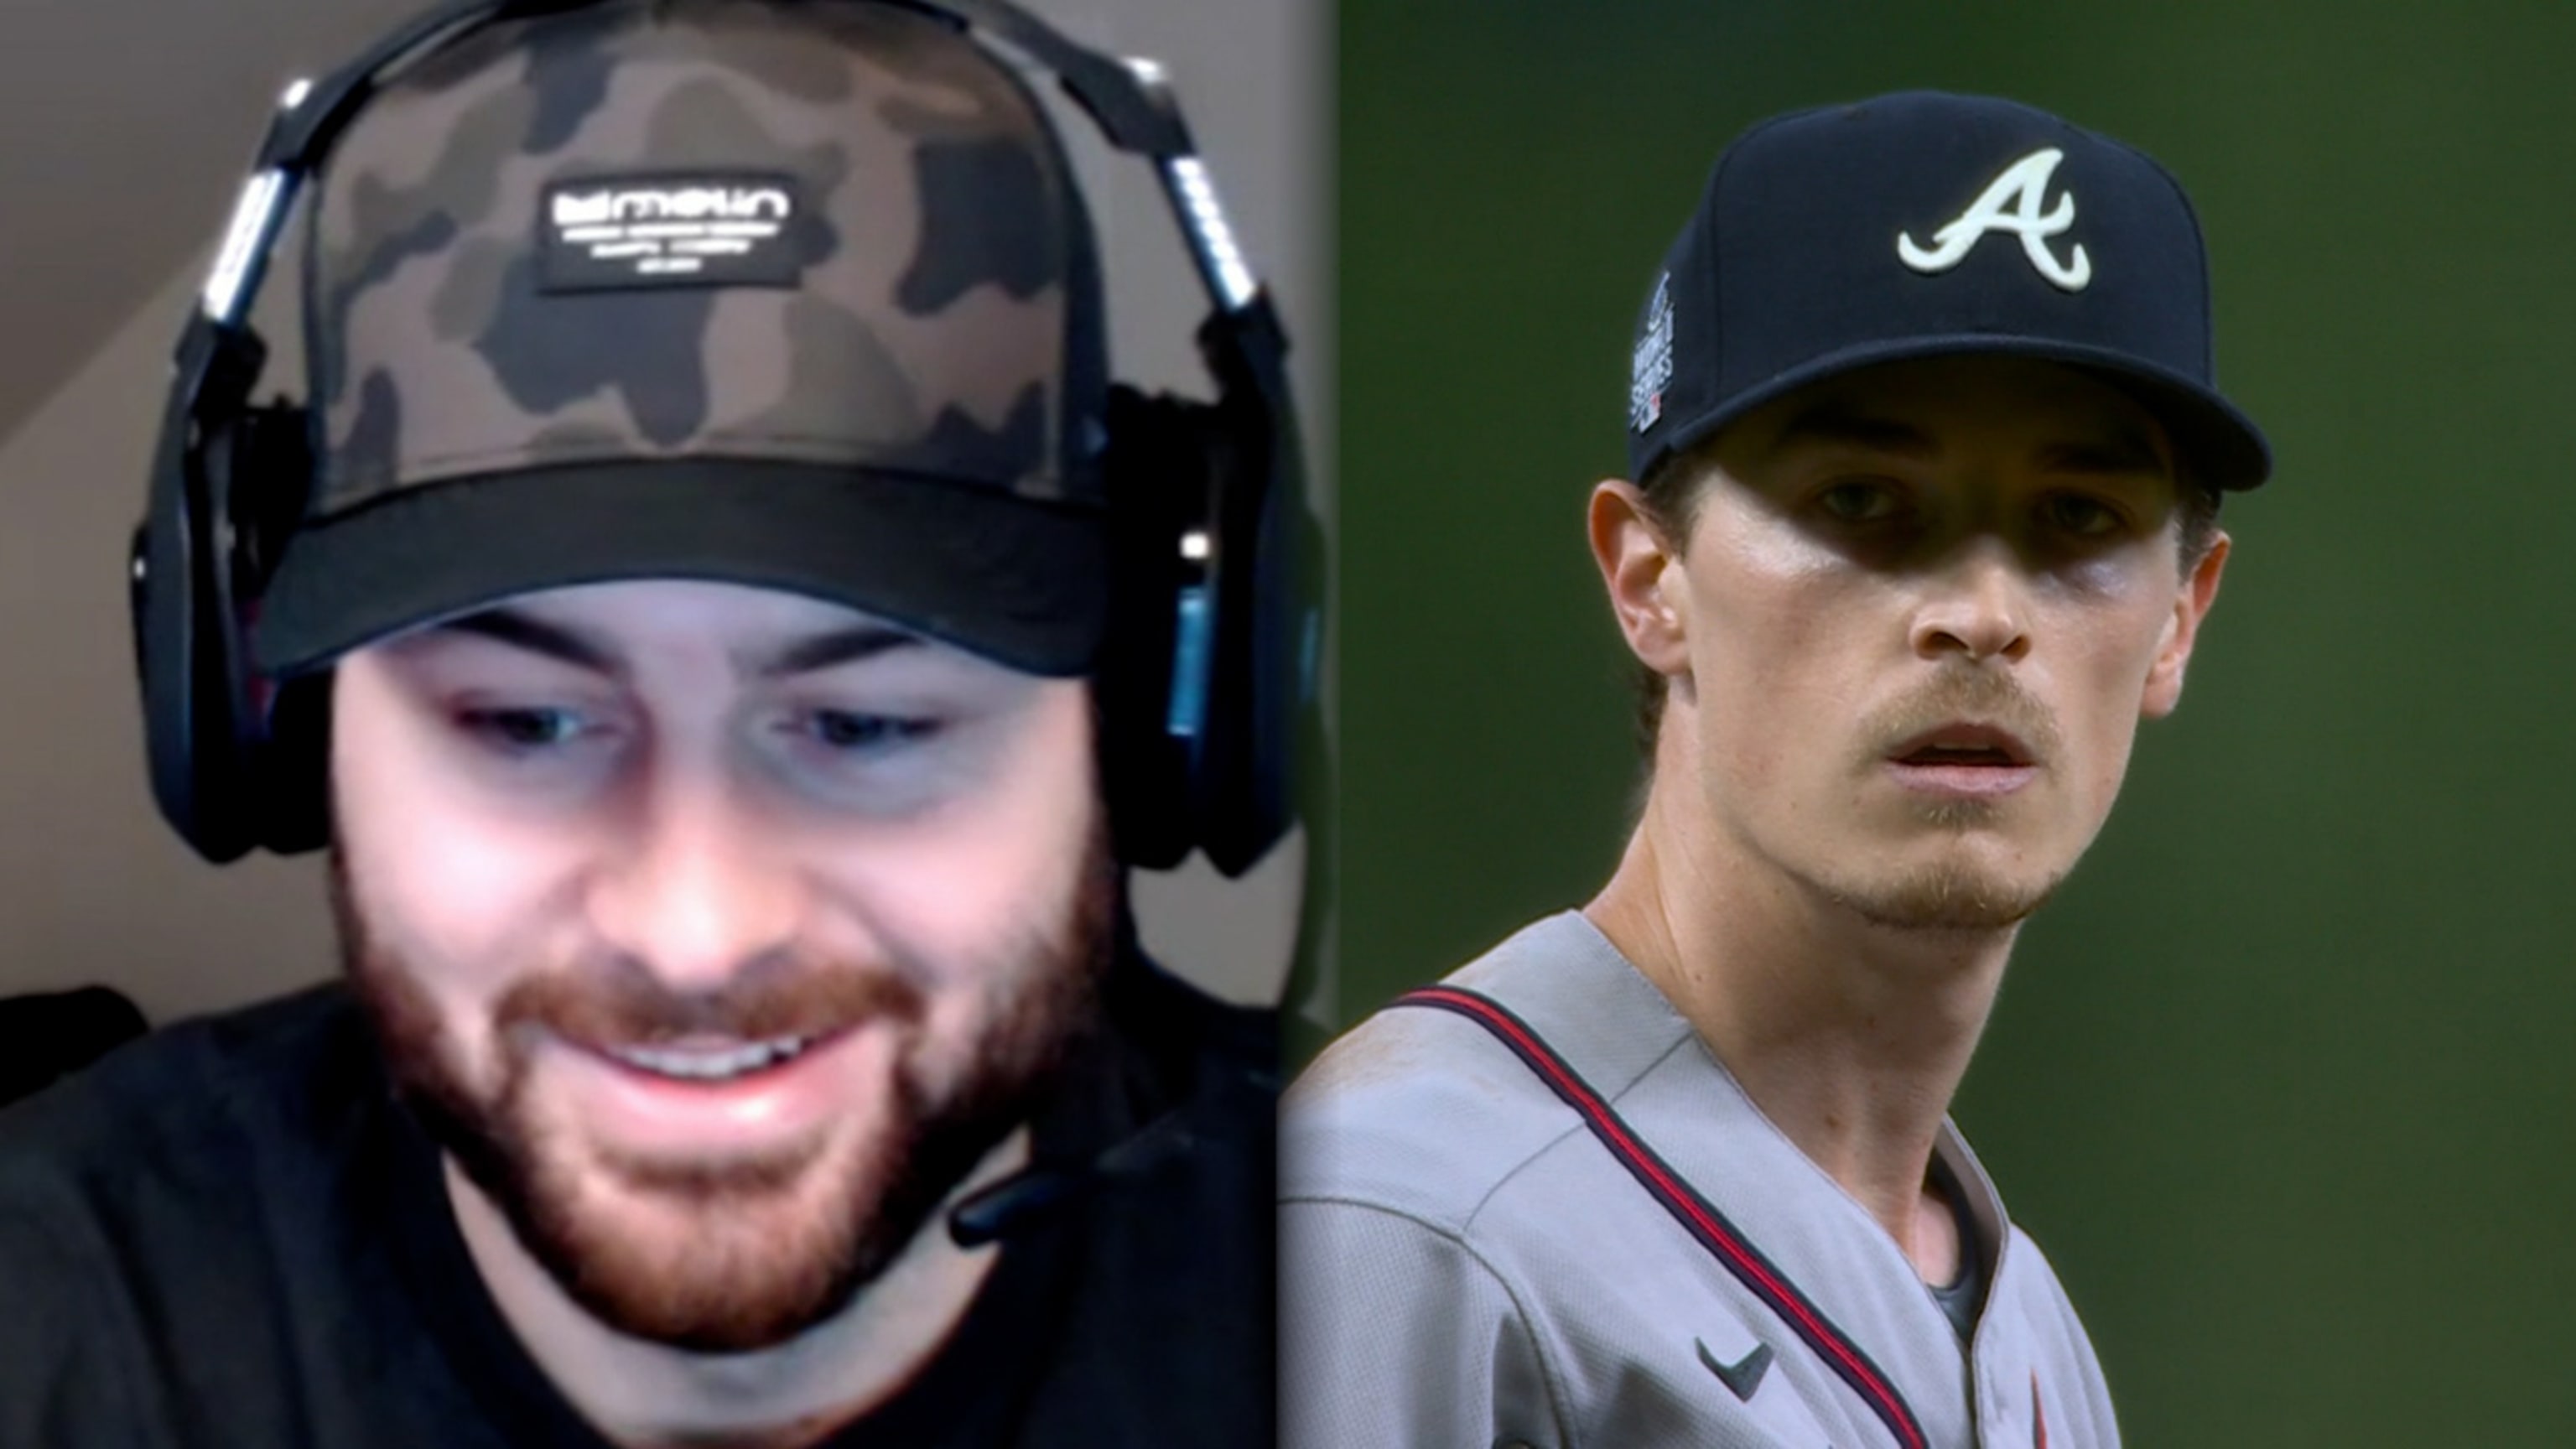 Giolito, Flaherty attend World Series to support HS teammate Max Fried